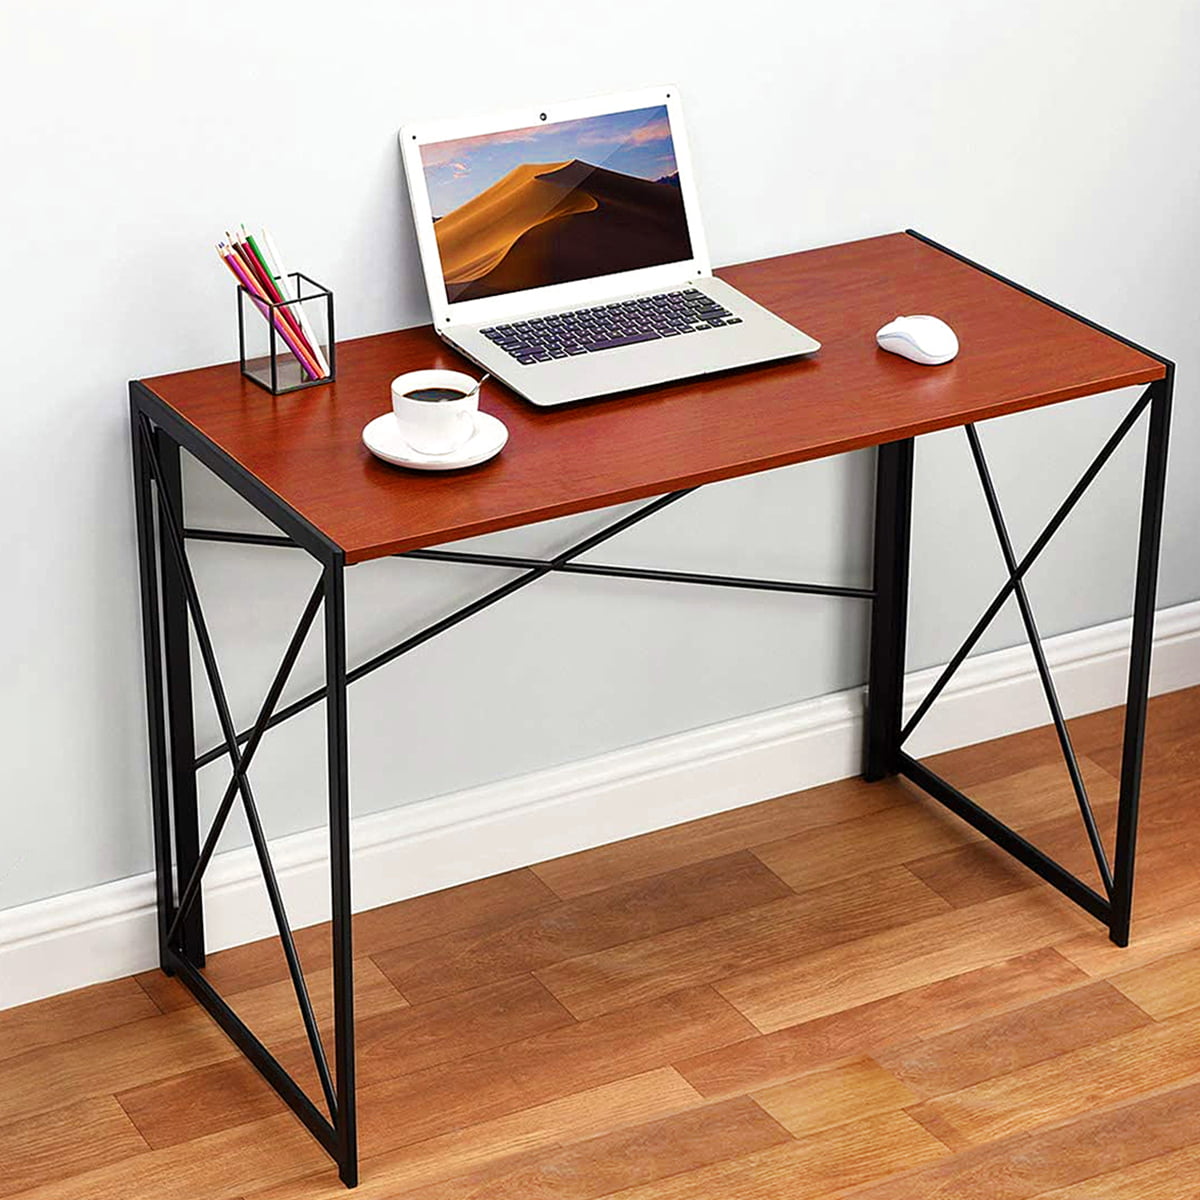 Industrial Look Metal Folding Computer Table Desk Home Office Study Workstation 